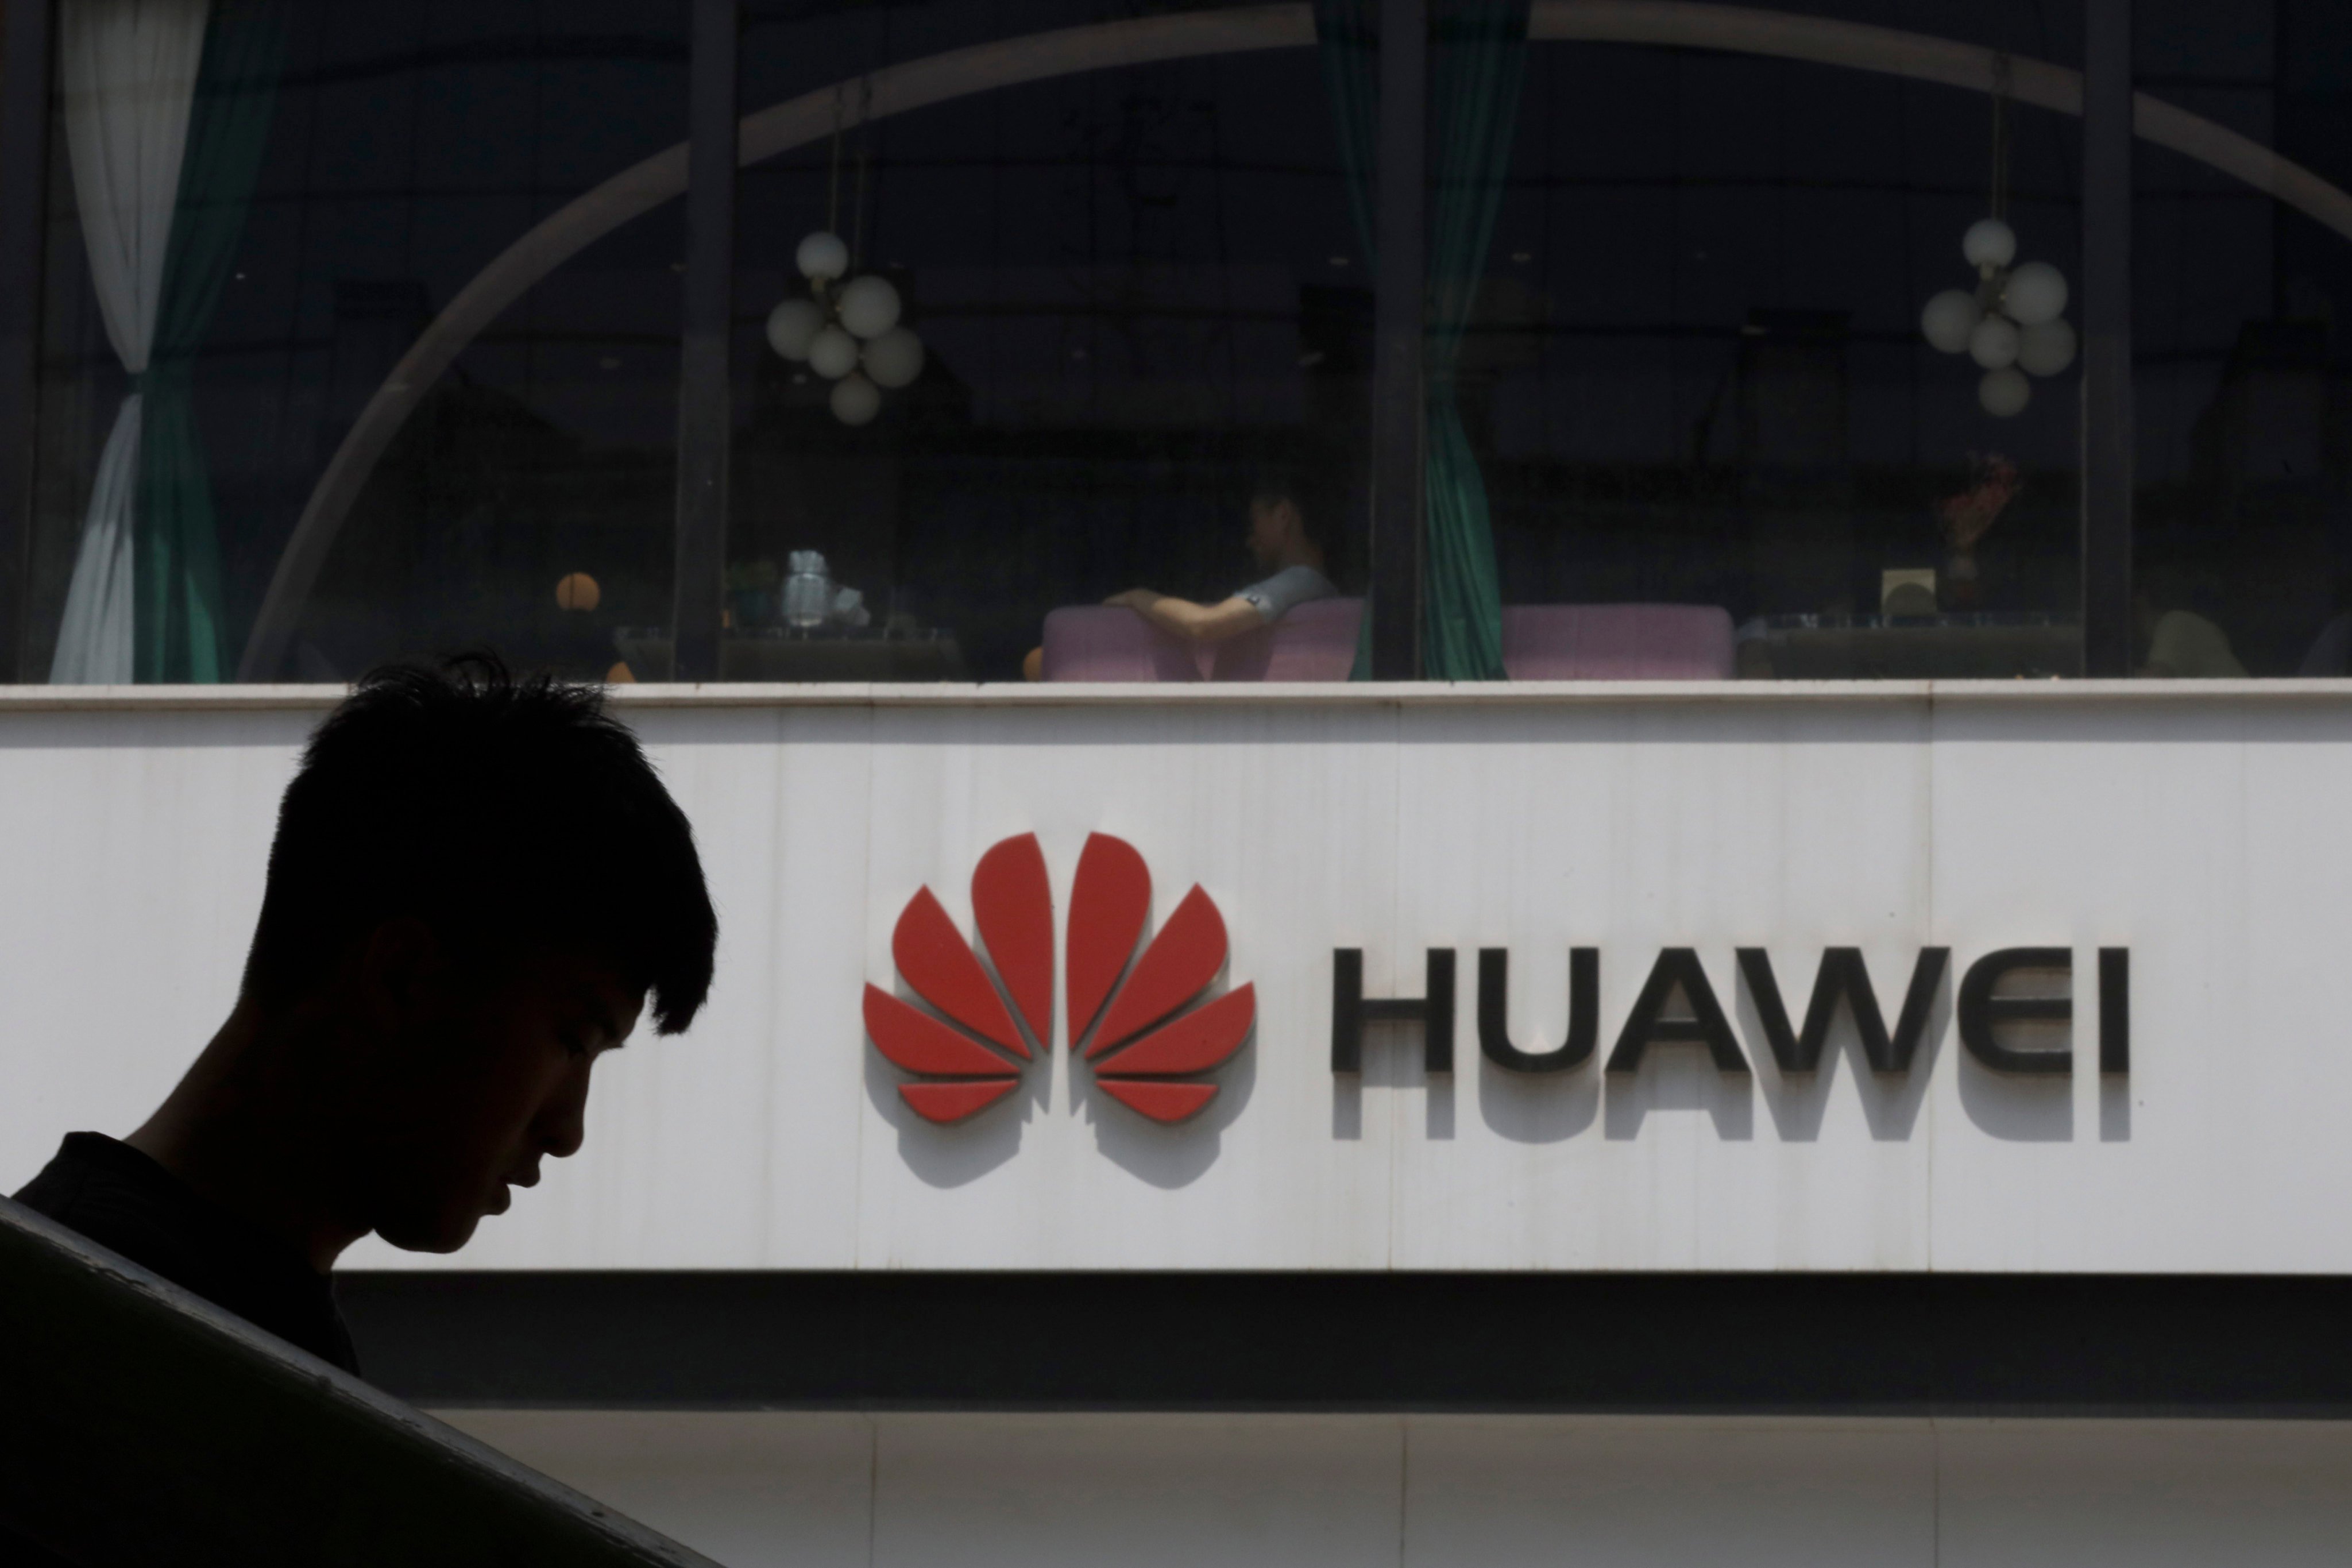 The Huawei logo is seen on a building in Beijing in May 2019. Photo: AP